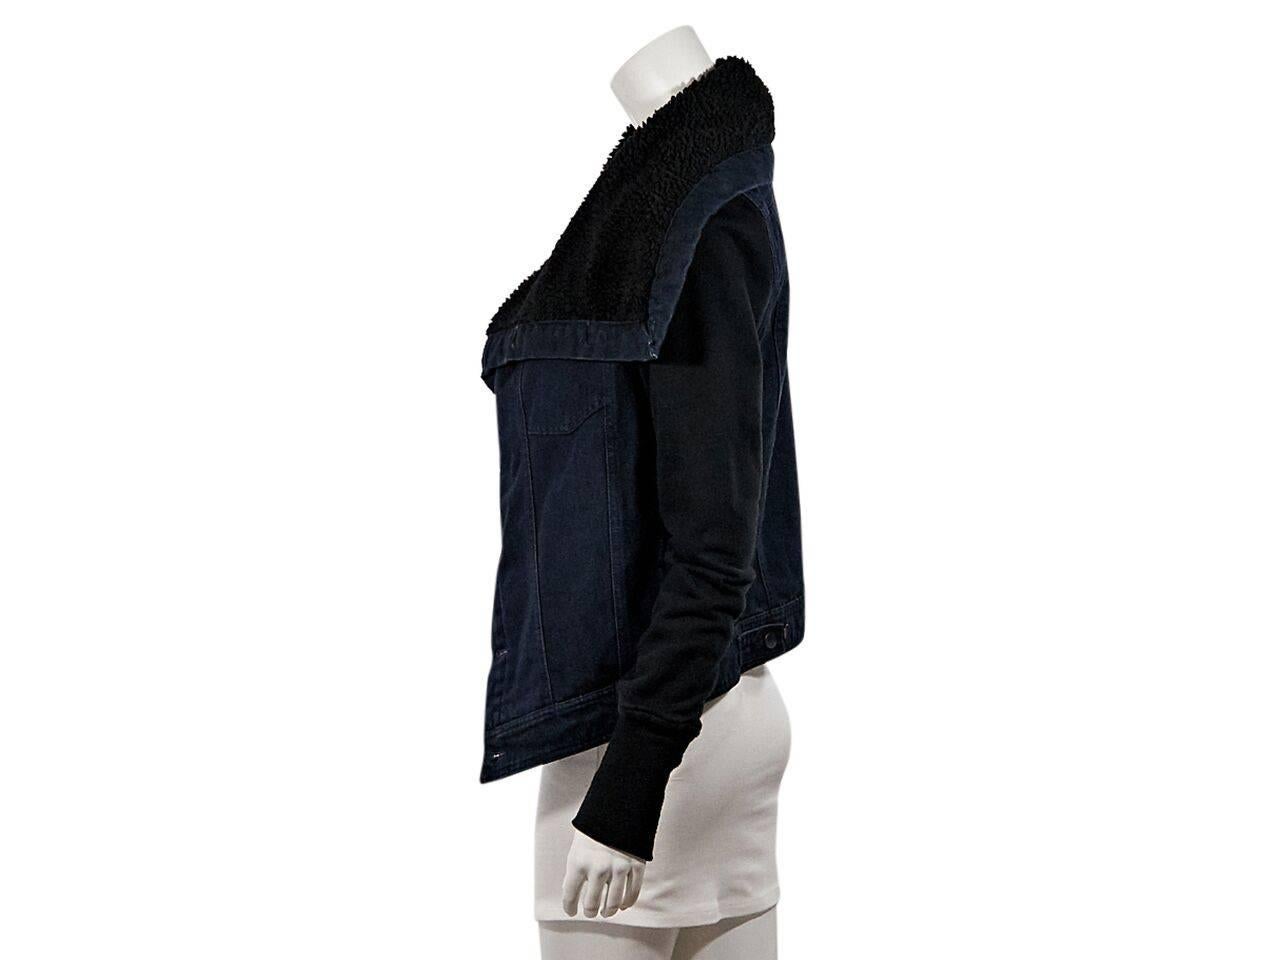 Product details:  Dark blue denim jacket by Oak.  Faux shearling lining.  Draped collar.  Long black sleeves.  Ribbed cuffs.  Button-front closure.  Back hem button tab straps. 
Condition: Pre-owned. Very good.